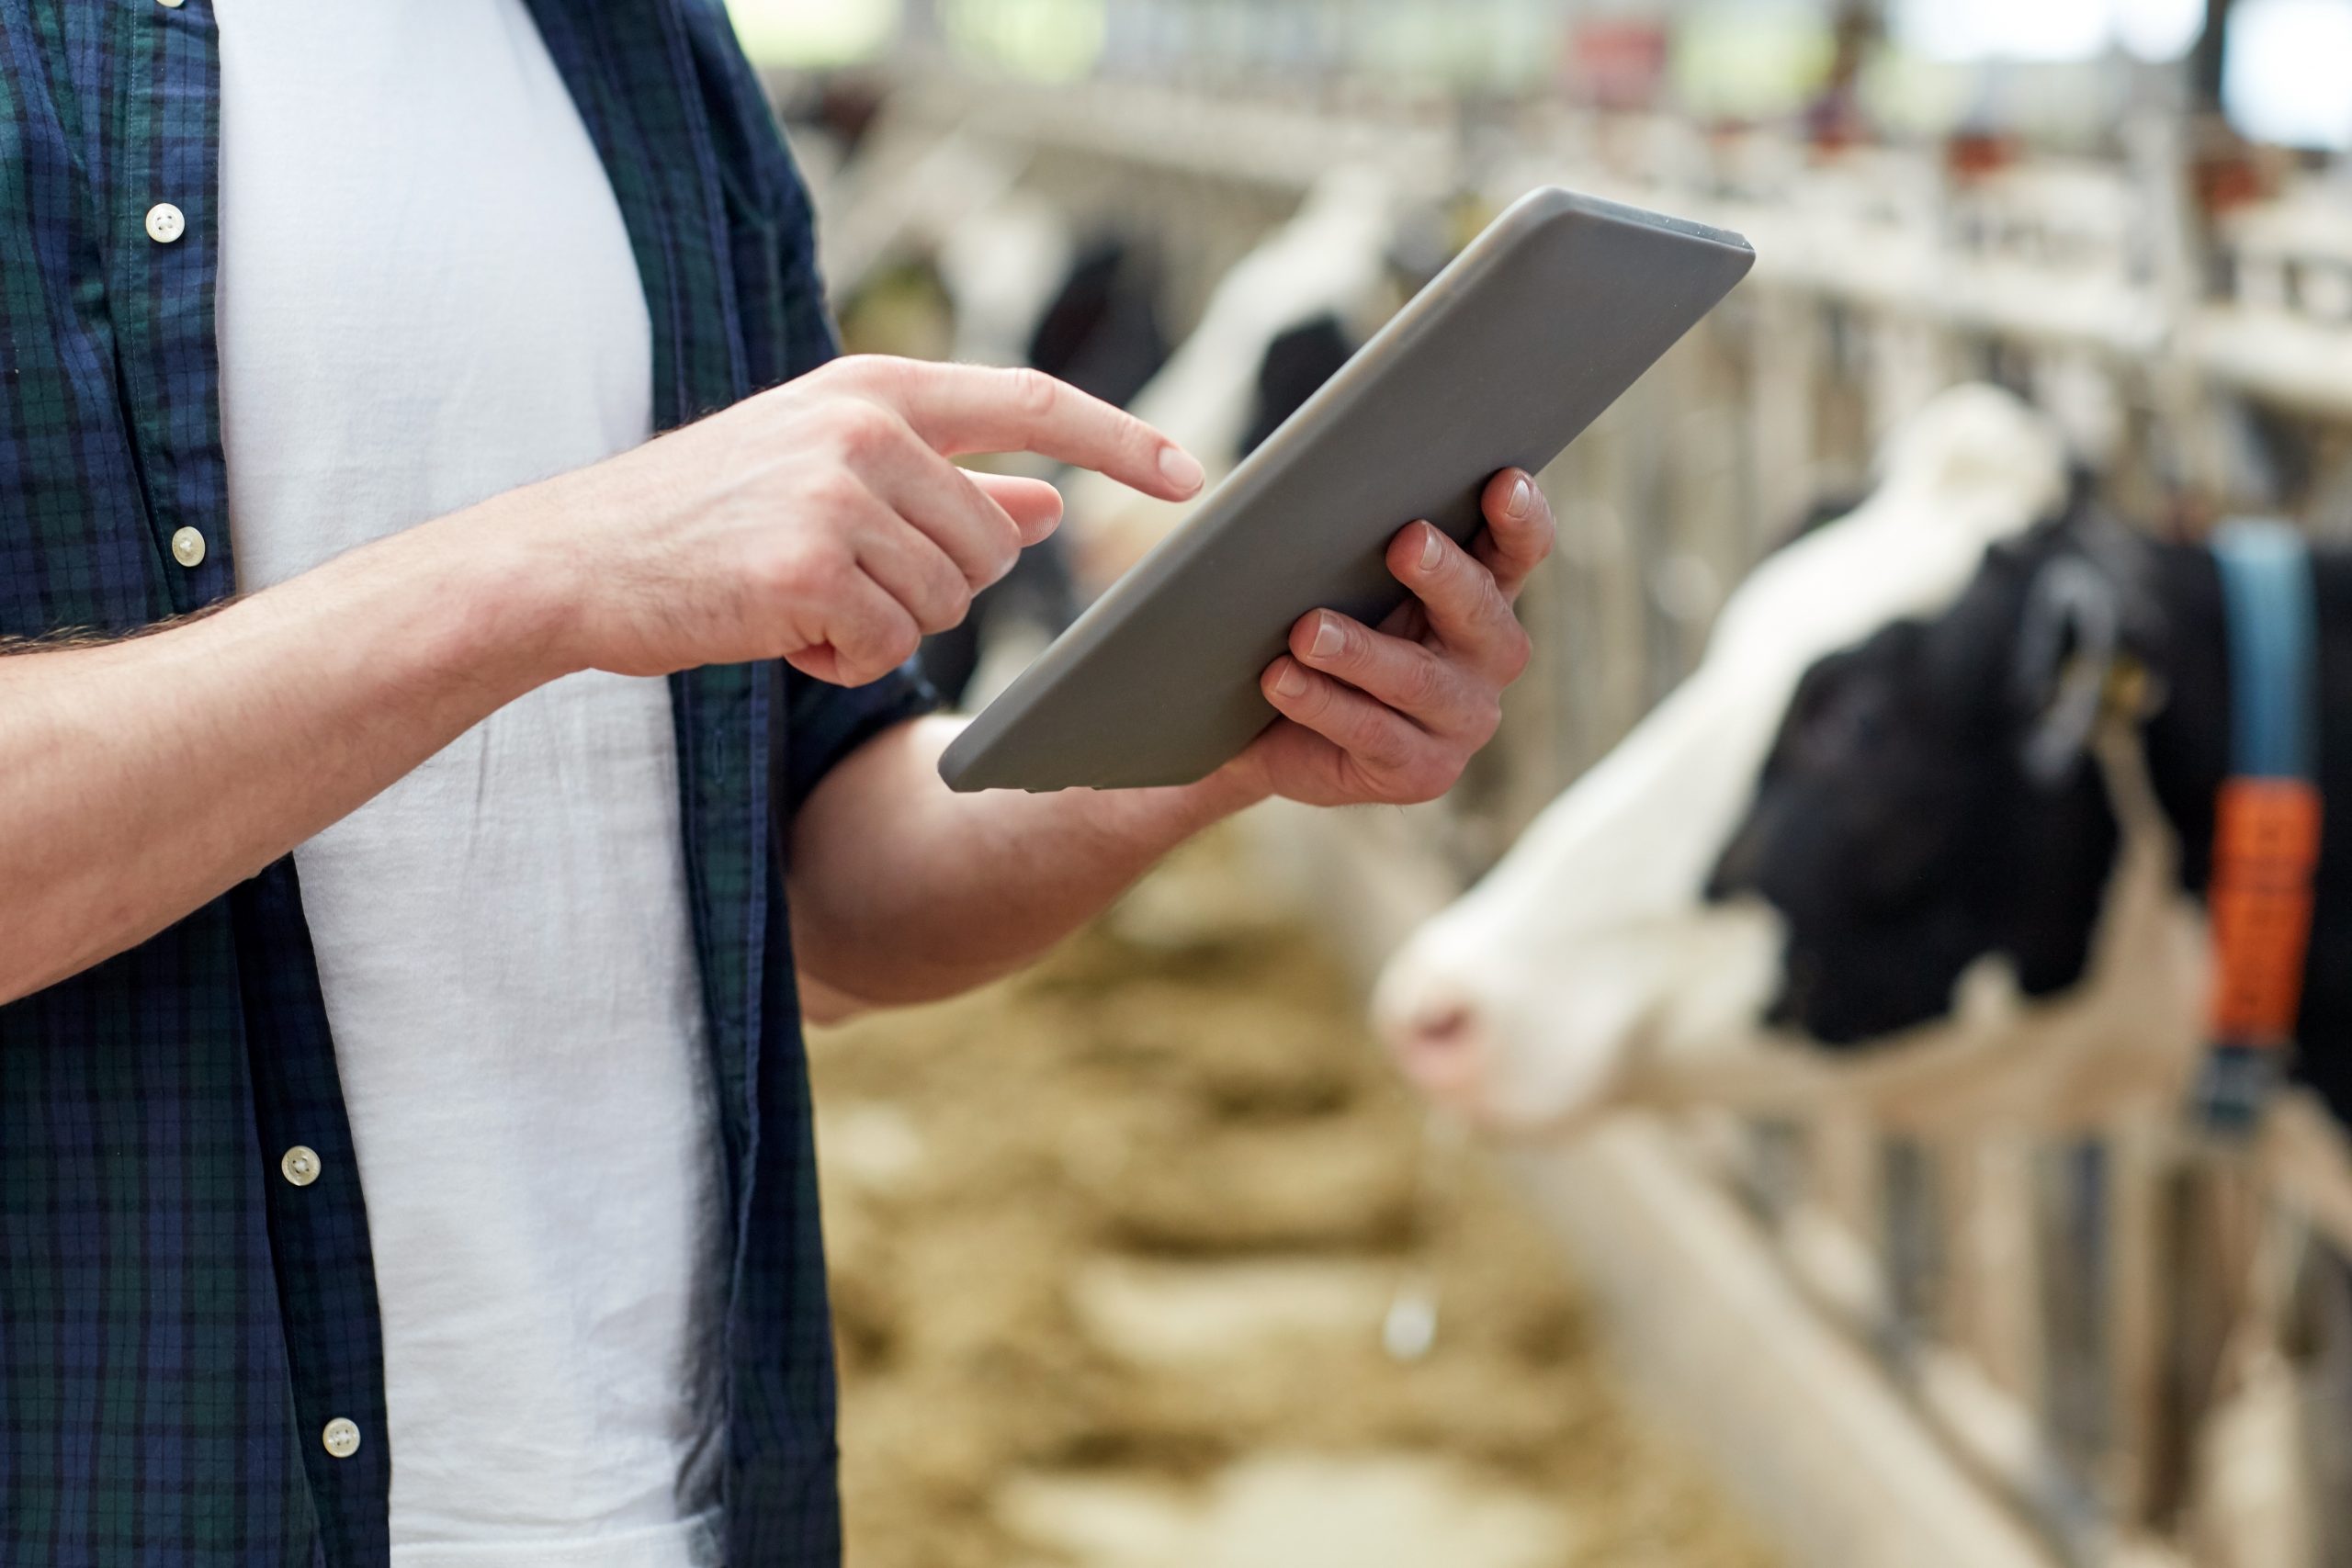 What s new in the feed business? Photo: Syda Productions/Shutterstock